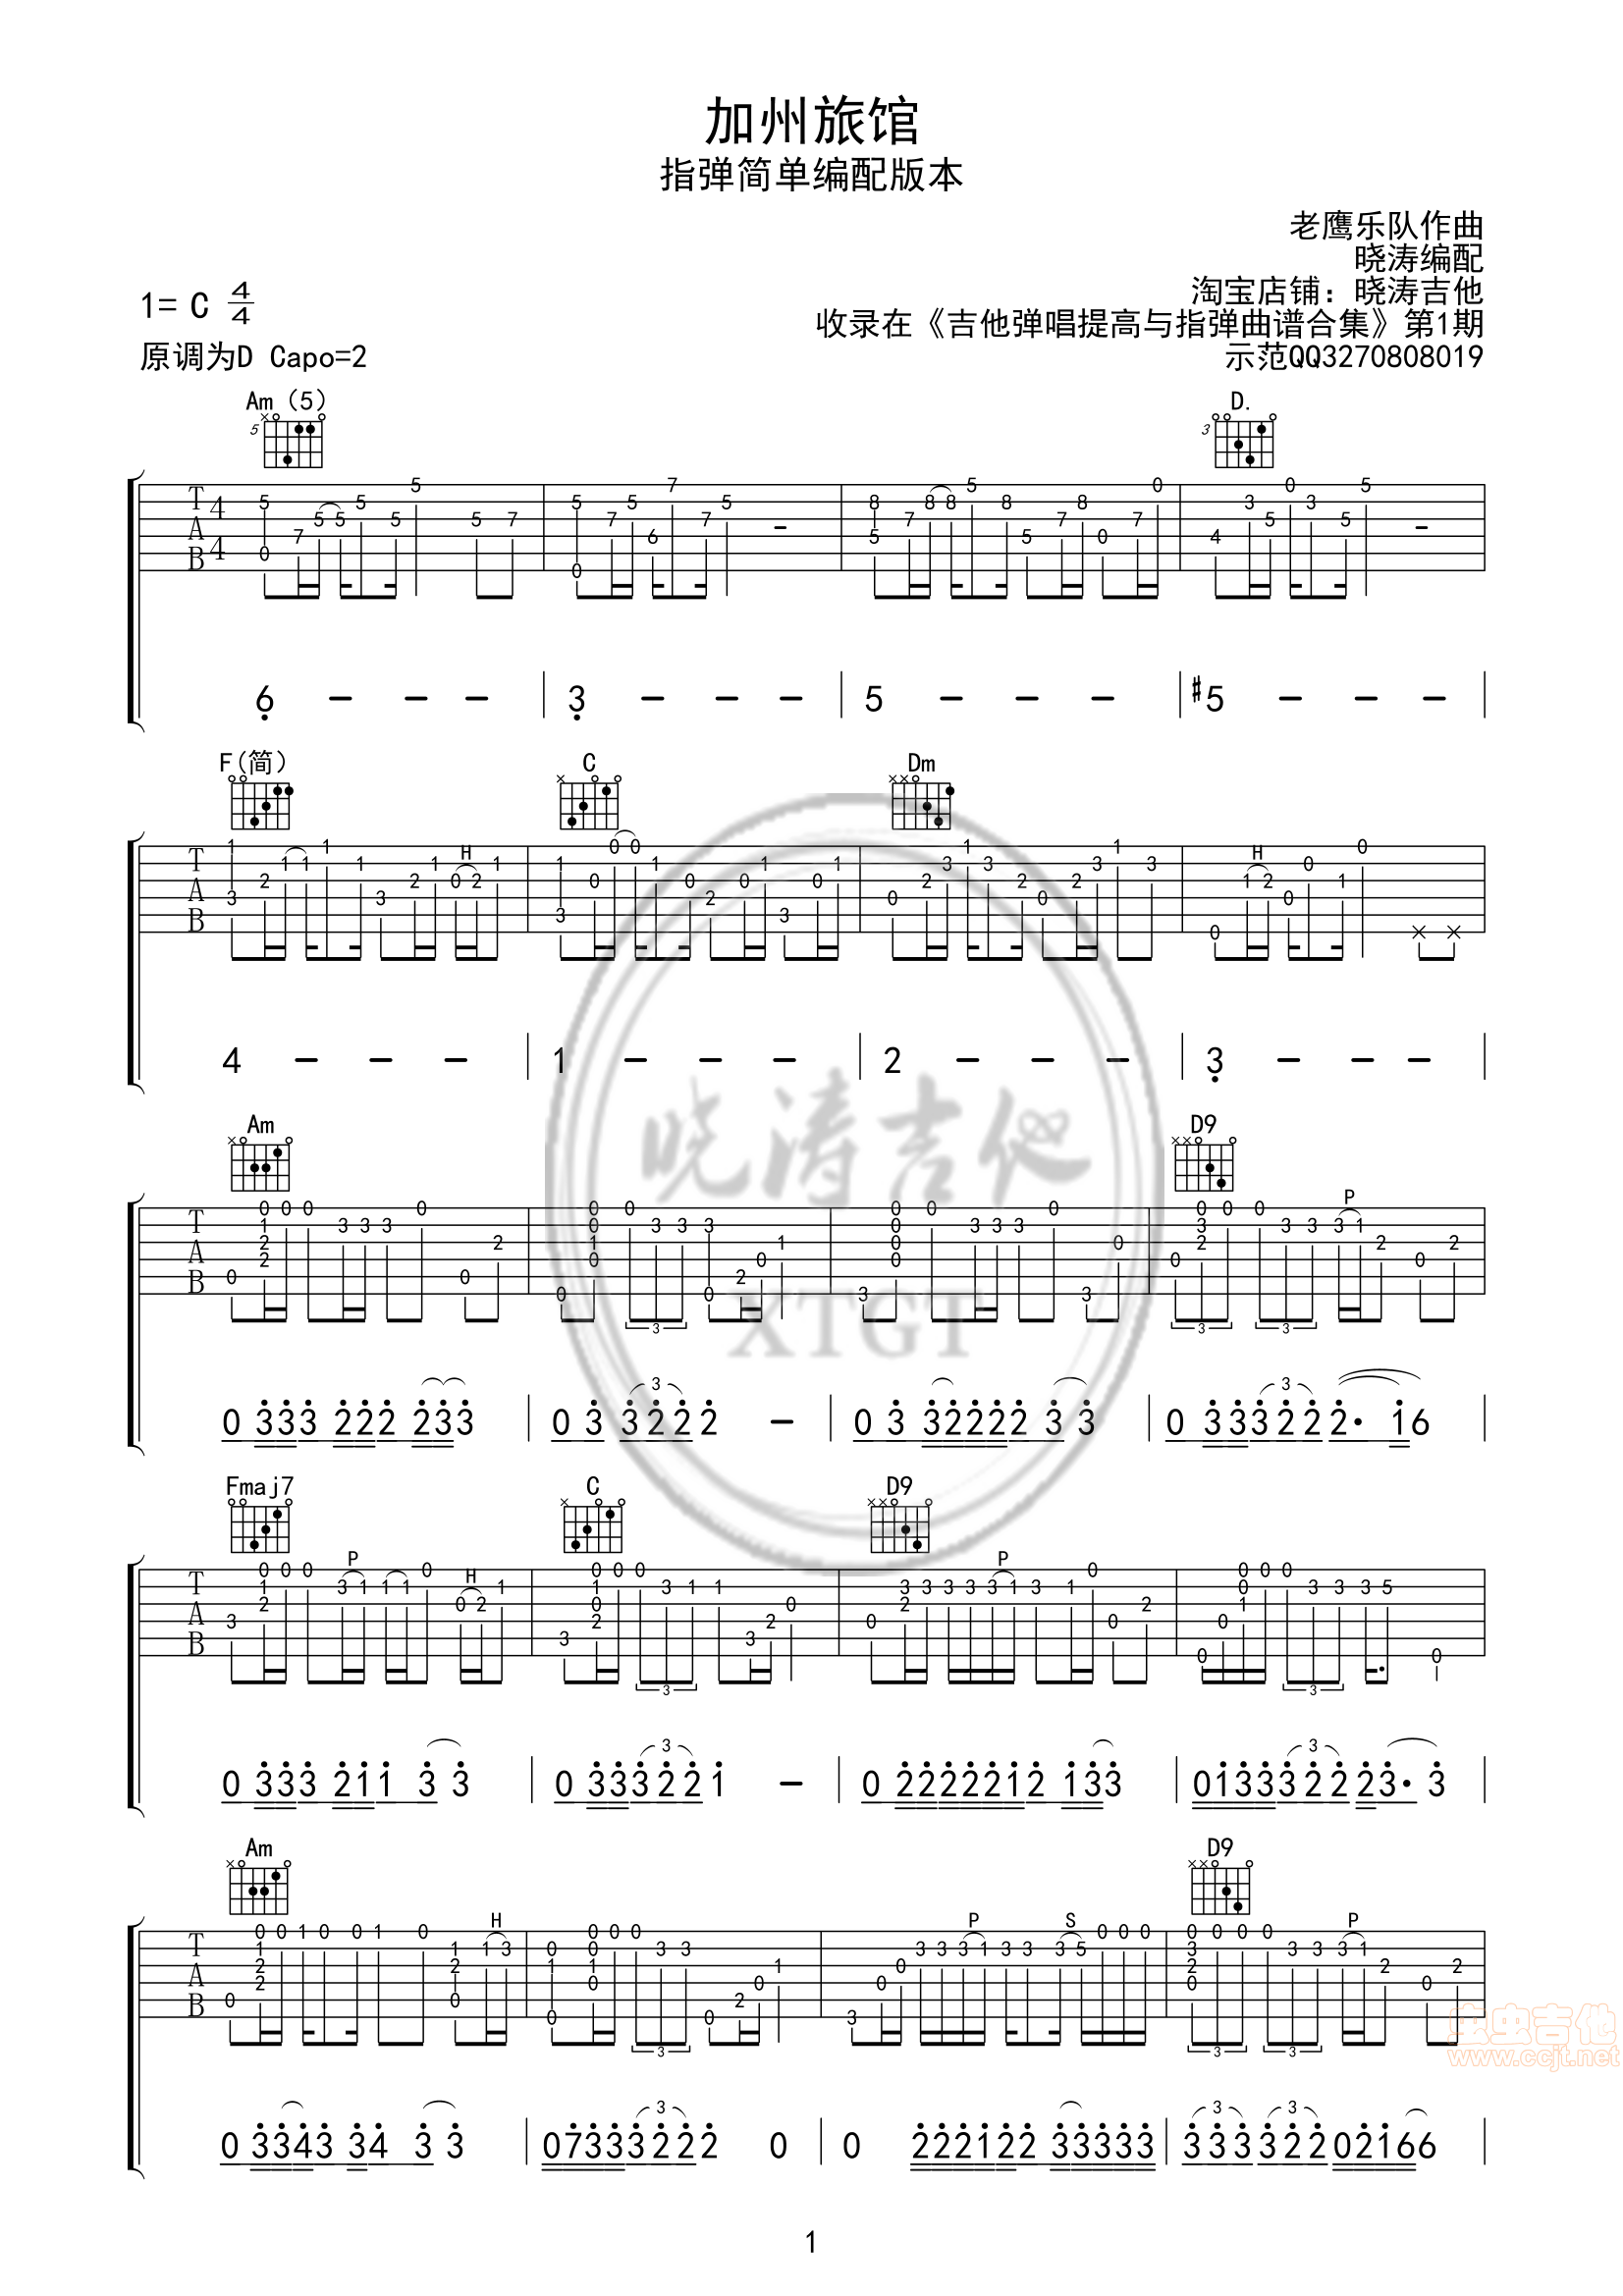 Eagles Get Over It Sheet Music Notes, Chords